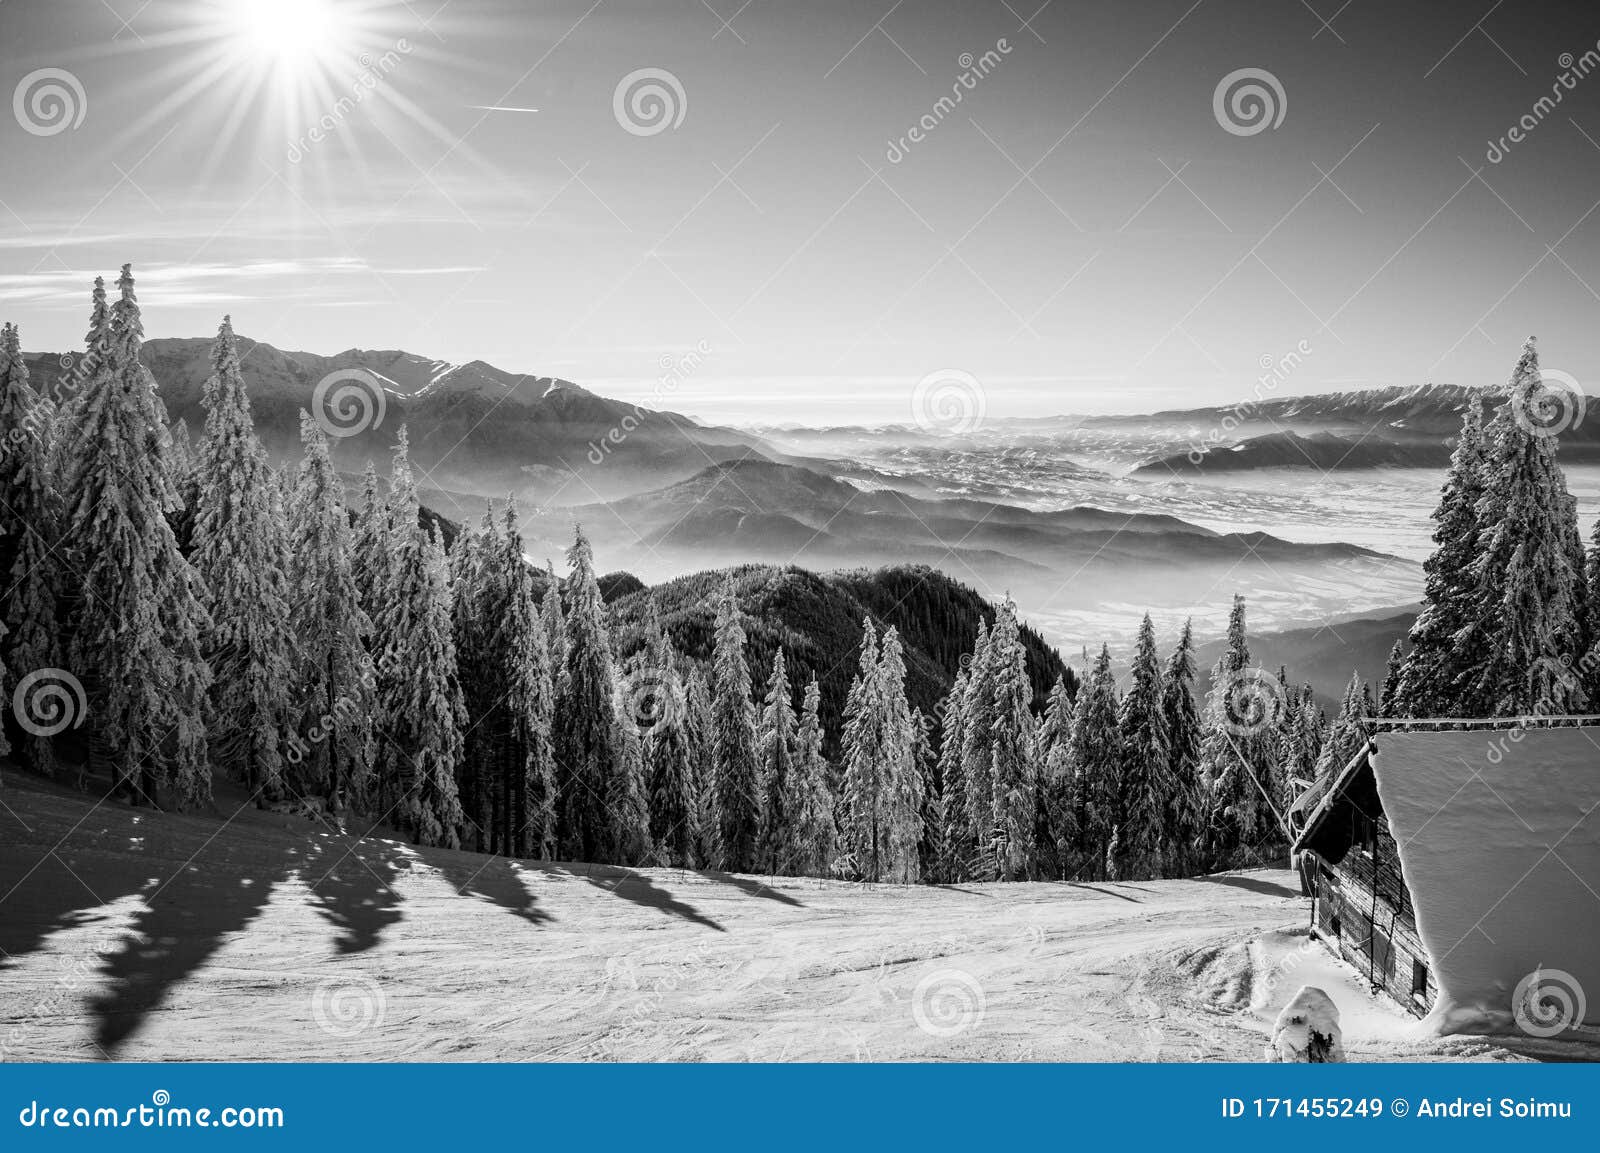 Black and White Winter Scenery Stock Image - Image of winter, forest ...